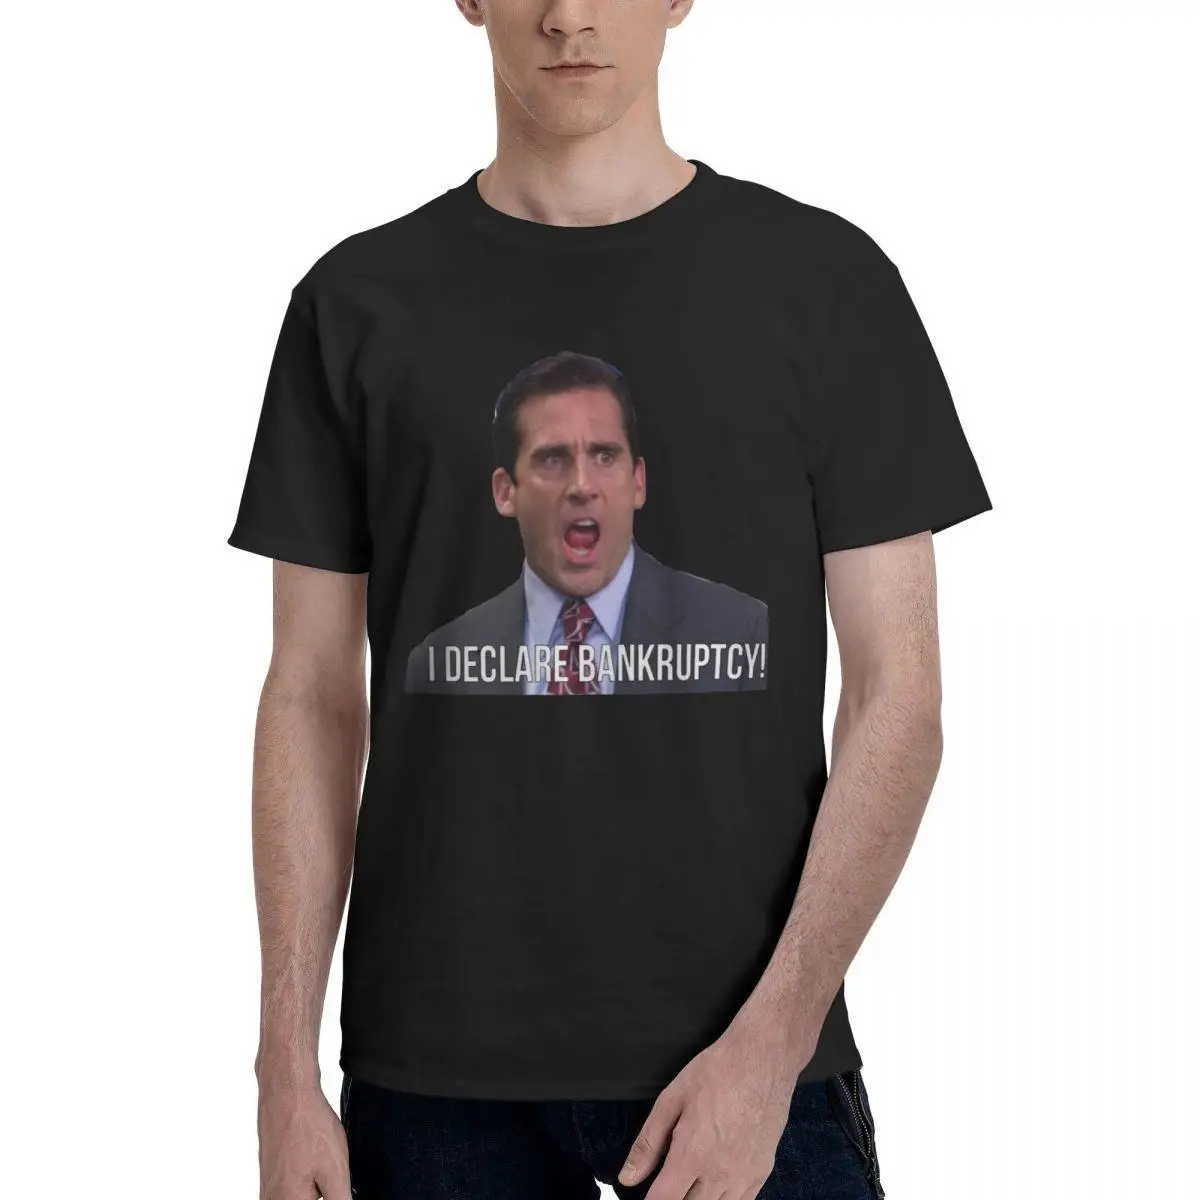 Michael Scott I Declare Bankruptcy T Shirt for Men Pure Cotton Fun T-Shirts Crewneck The Office TV Tees Short Sleeve Tops Gift